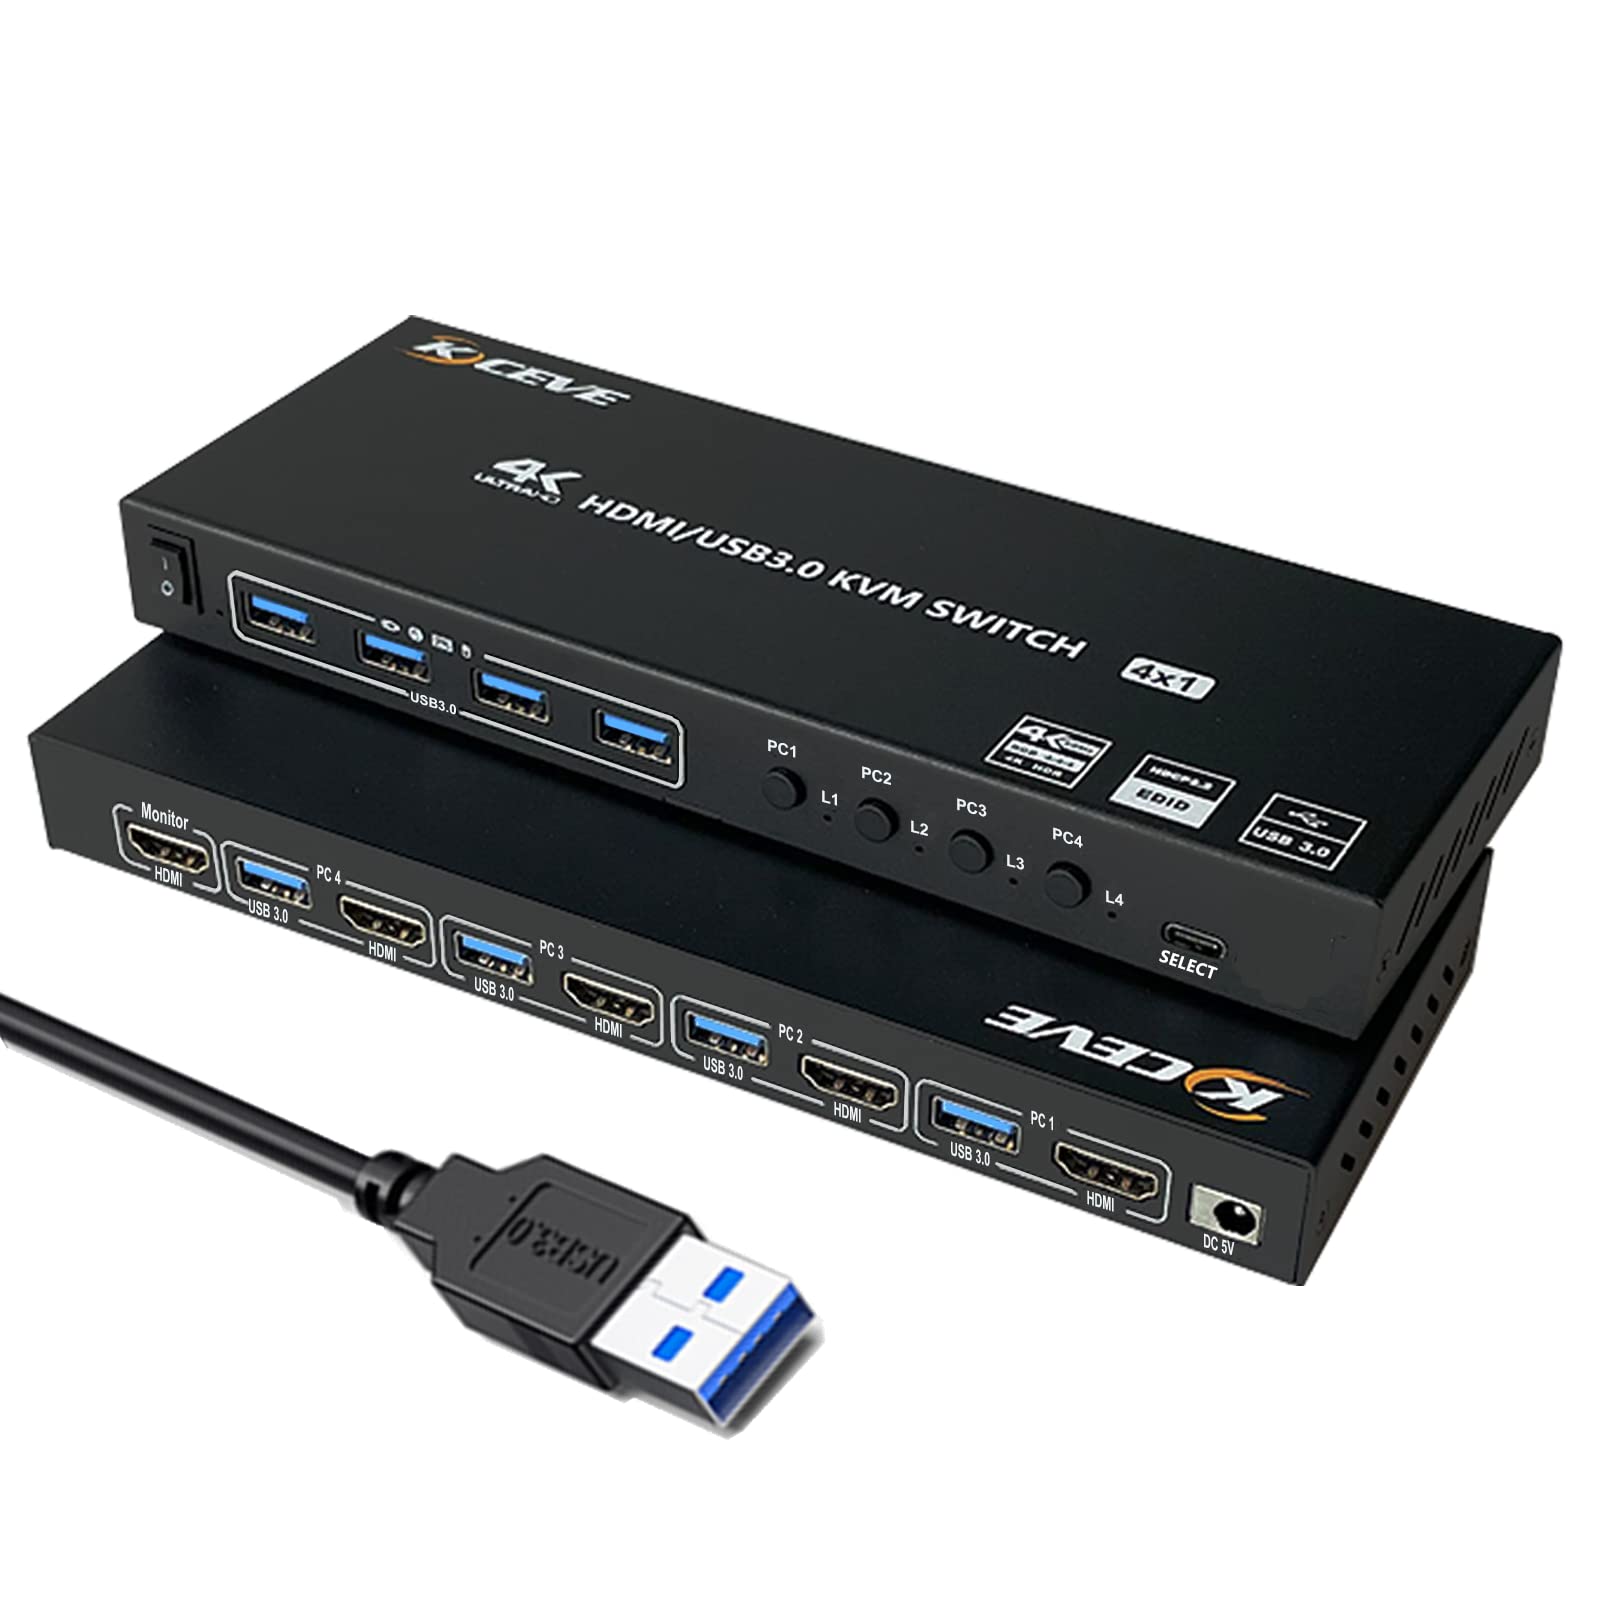 USB 3.0 KVM Switch HDMI 4 Port Support , USB Hub HDR EDID HDMI USB Switch 4 in 1 Out and 4 USB 3.0 Port for Keyboard Mouse Print